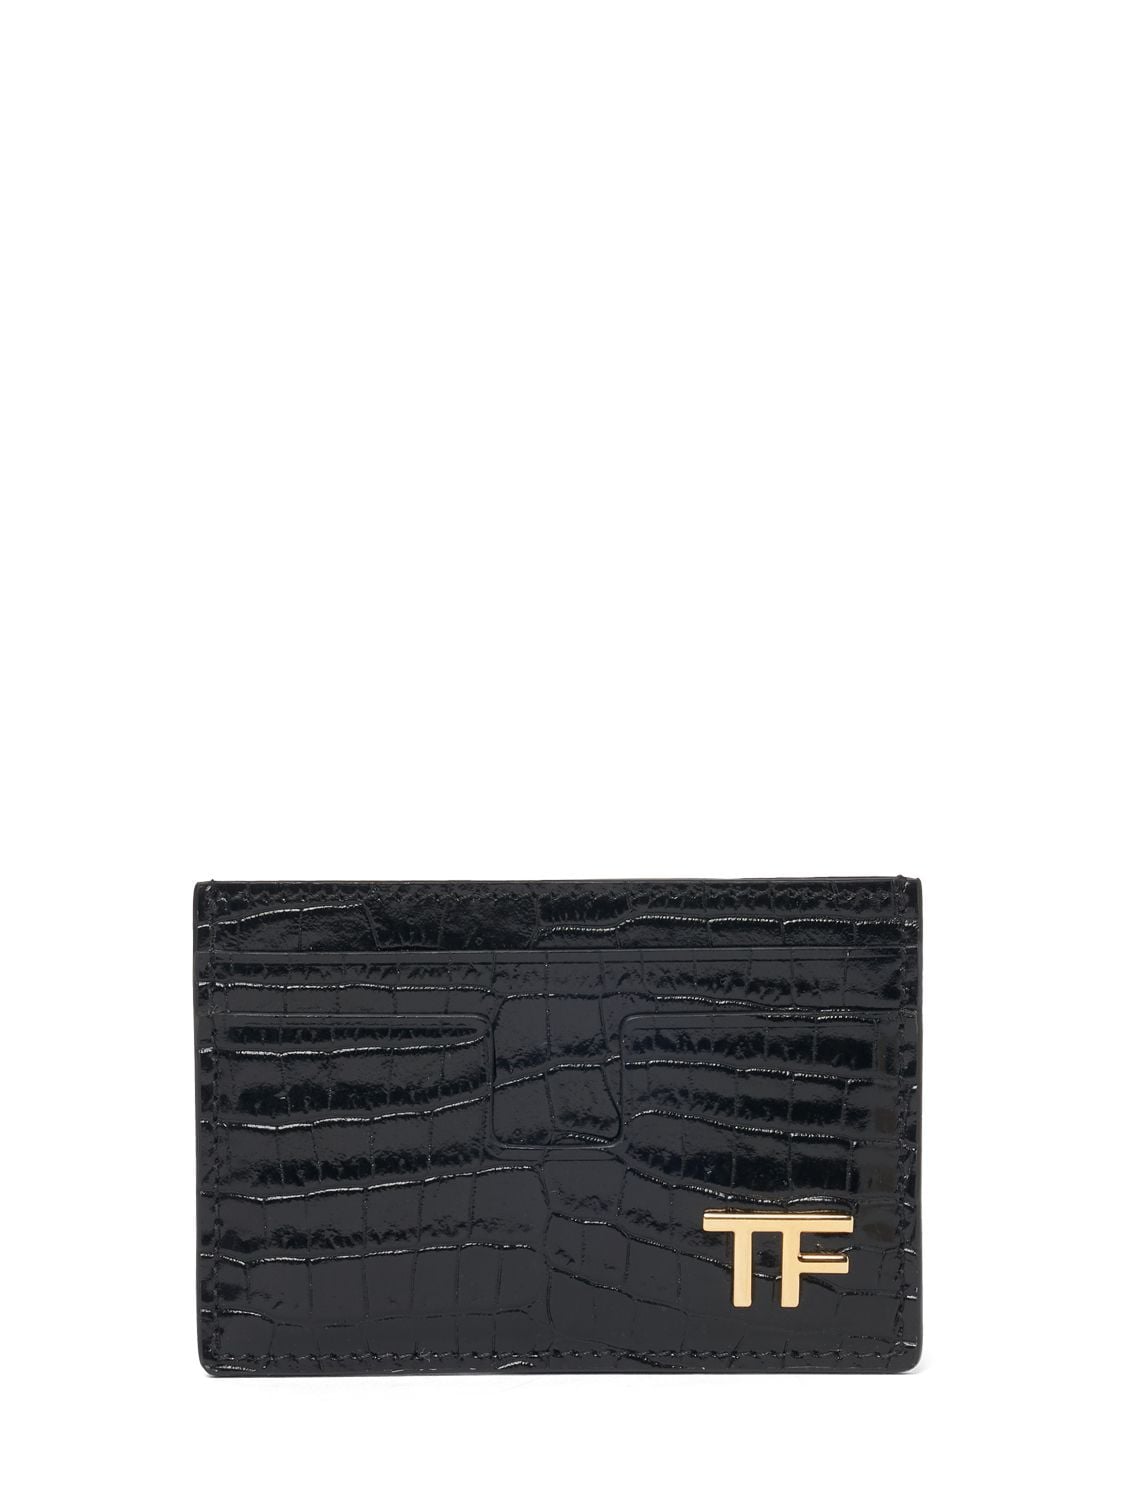 Image of Alligator Printed Leather Card Case